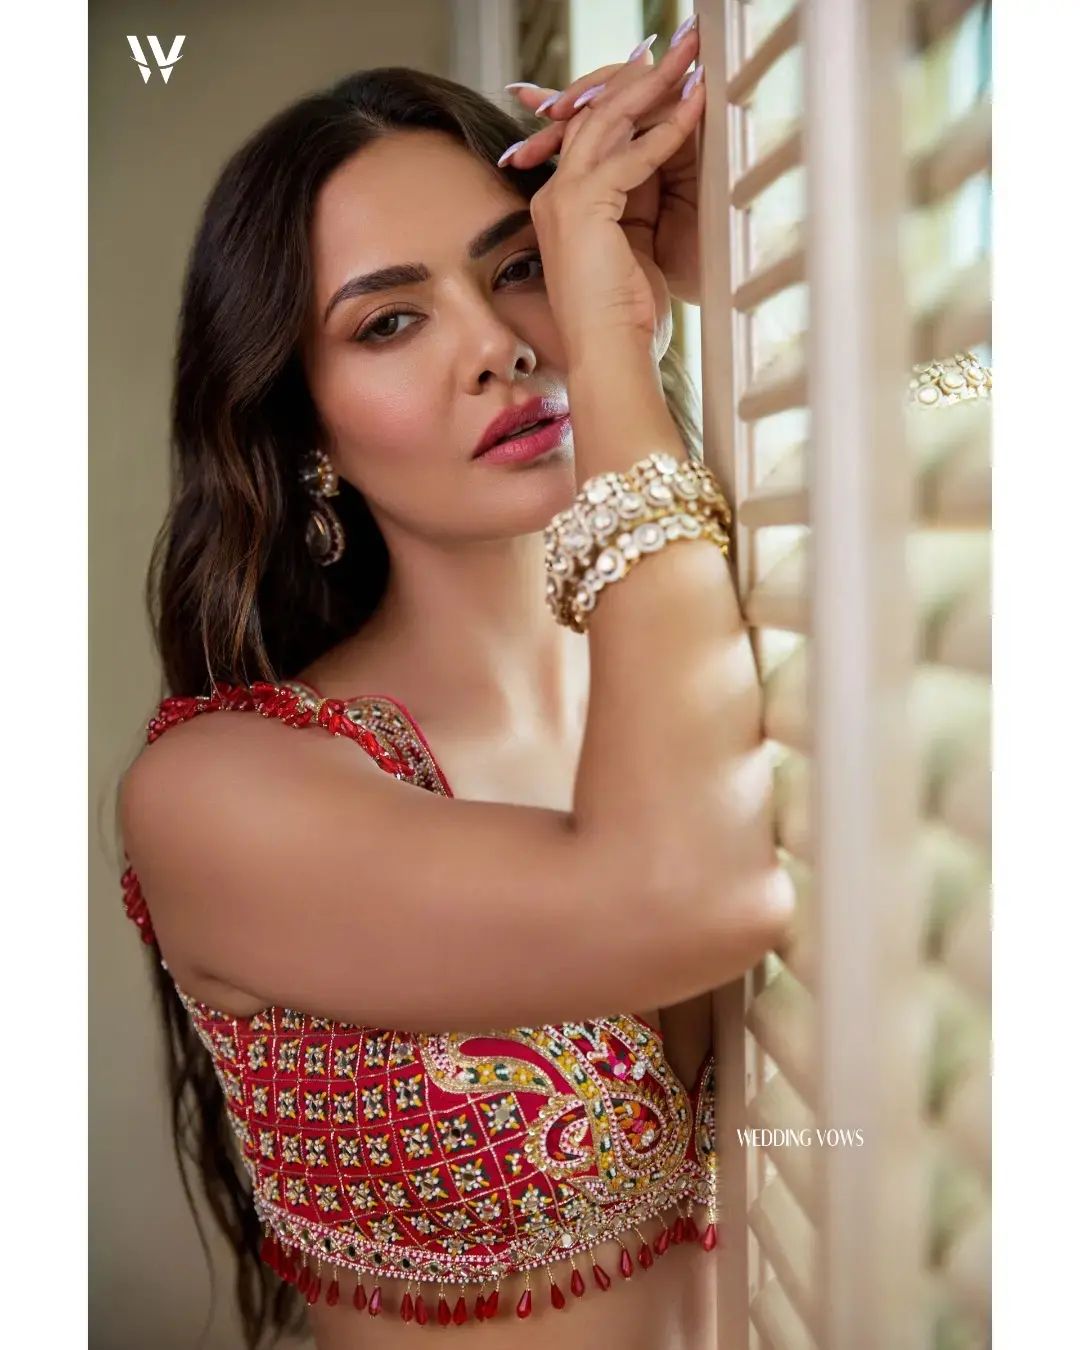 Esha Guptaâ€™s Instagram is a treat for her fans. The actress often drops the hottest pictures